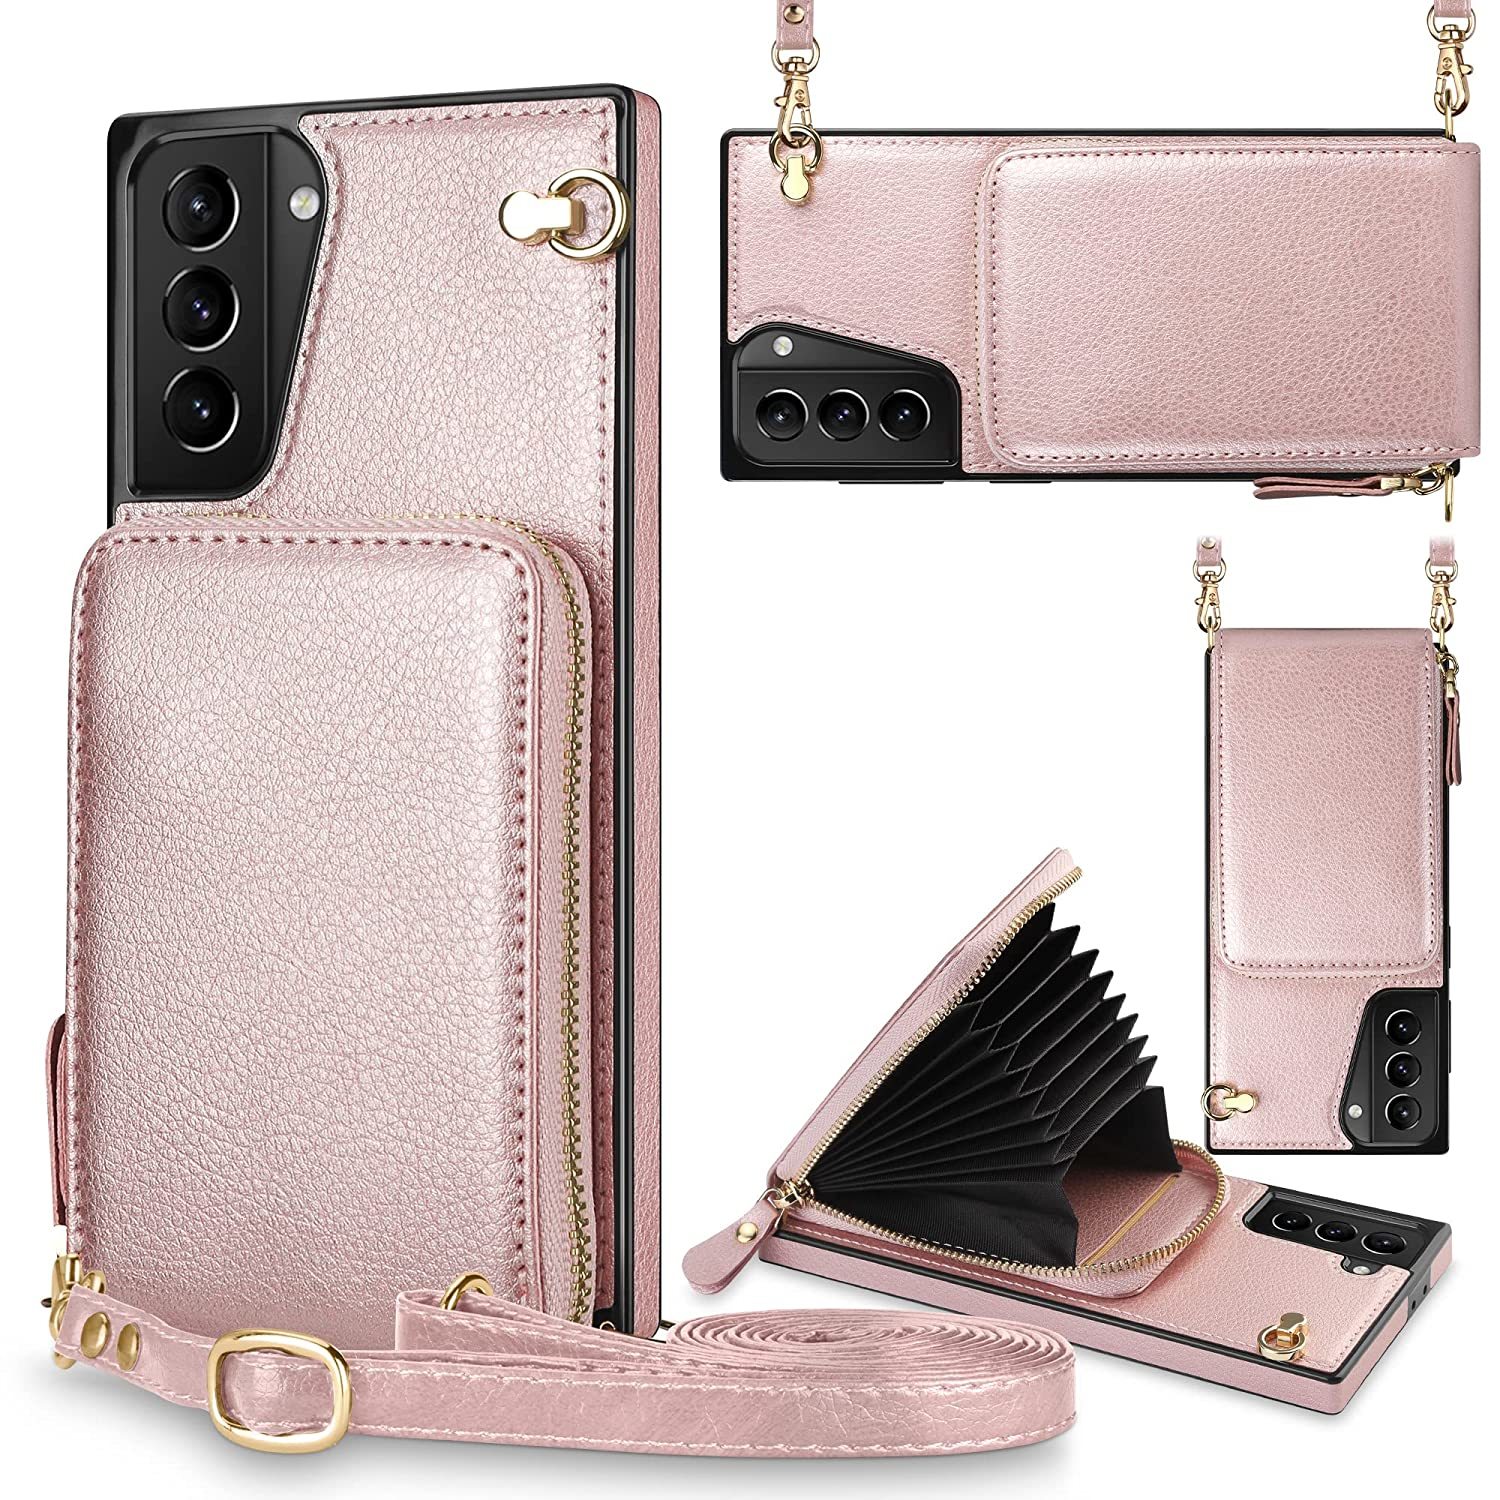 For Samsung Galaxy S21 Plus 5G Case Wallet Zipper Leather Case With Card Holder  - $35.99